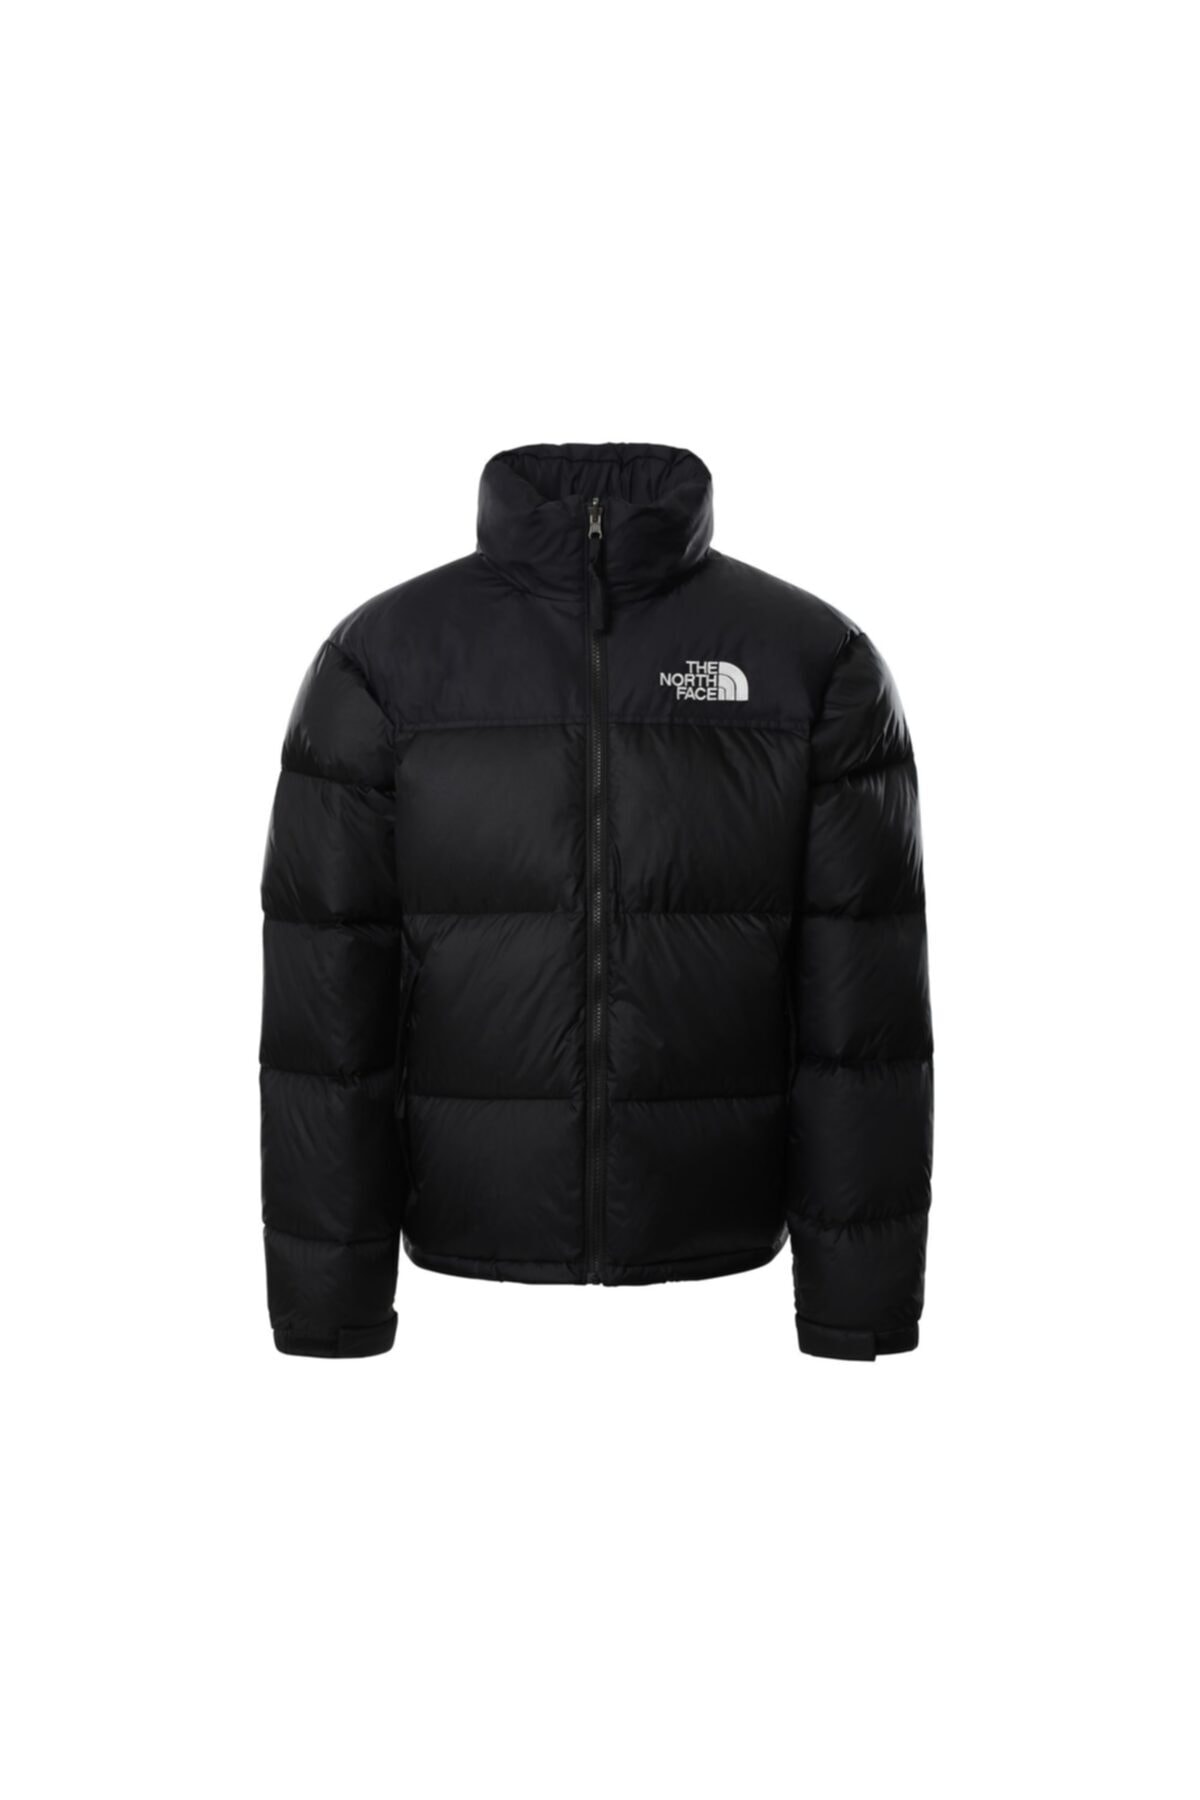 THE NORTH FACE M 1996 Rtro Npse Jkt Erkek Outdoor Montu Nf0a3c8dle41 Siyah